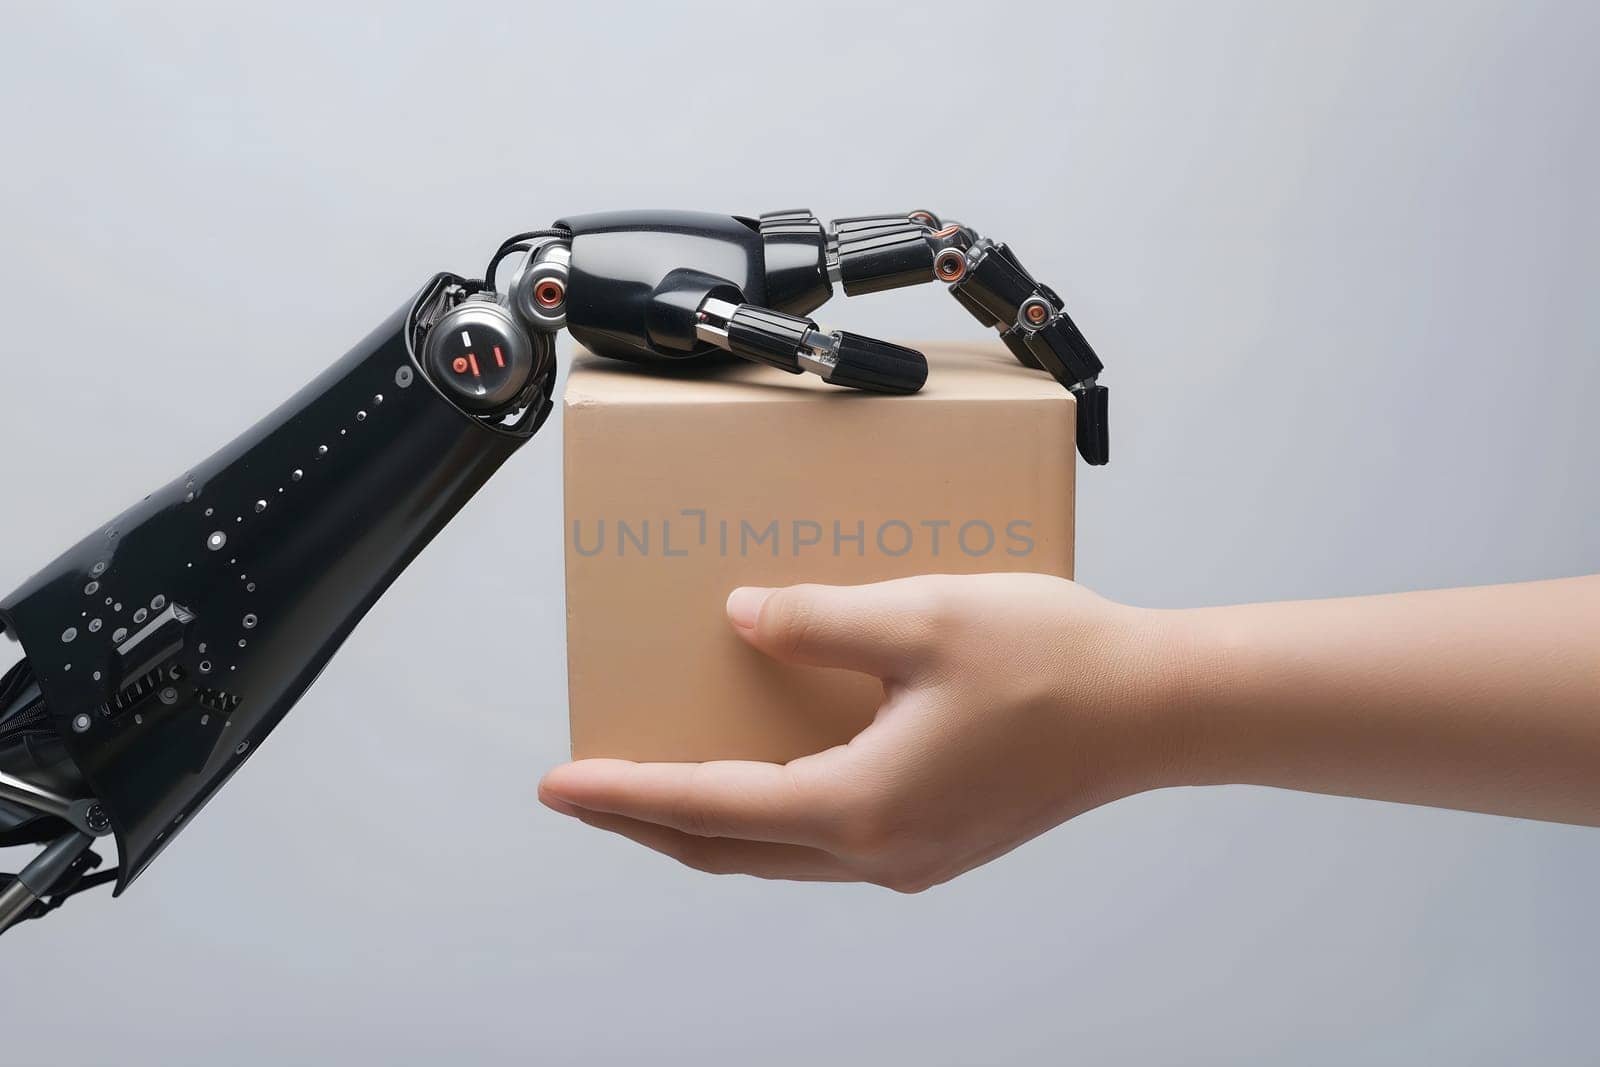 robot hand giving cardboard box to human hand by z1b